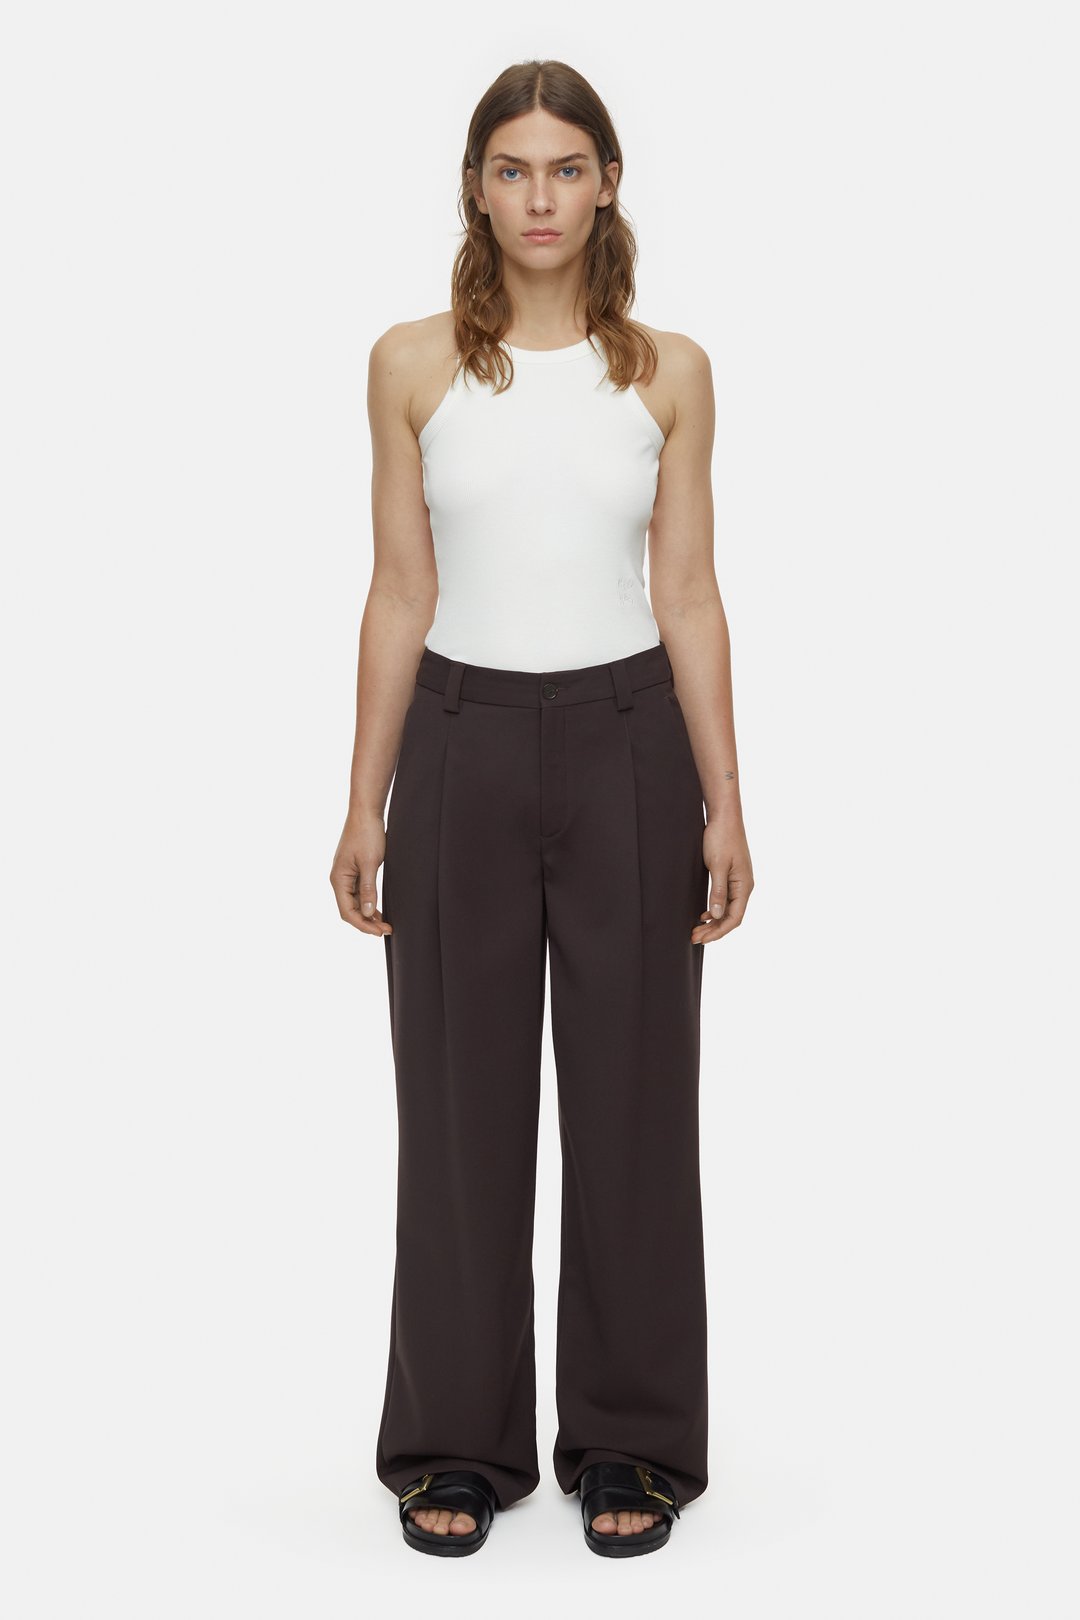 RELAXED PANTS - STYLE NAME BROOKS | CLOSED